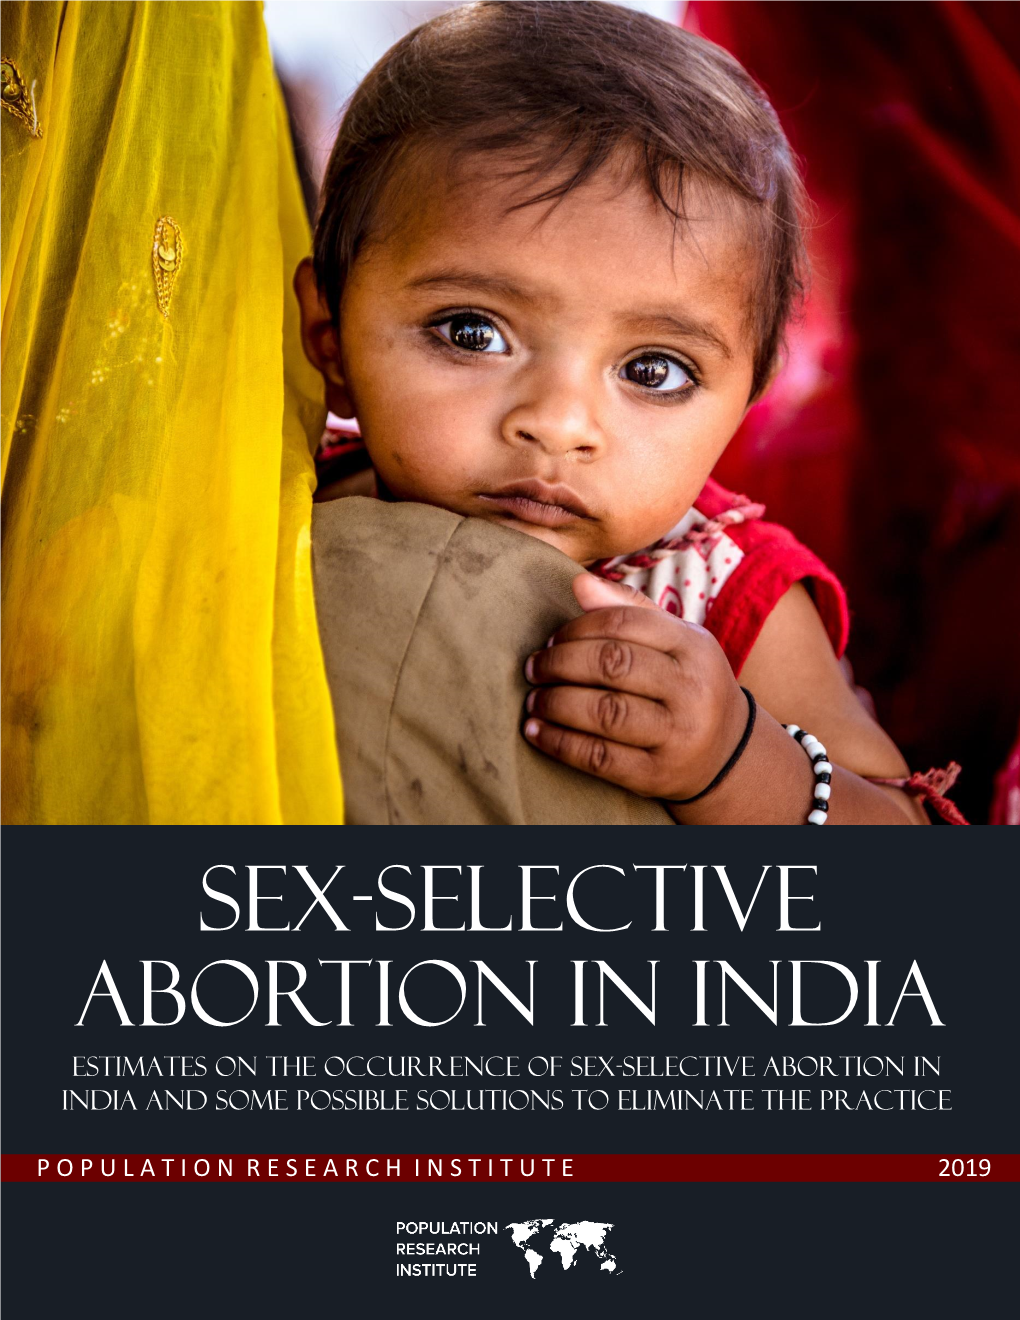 Sex-Selective Abortion in India and Some Possible Solutions to Eliminate the Practice